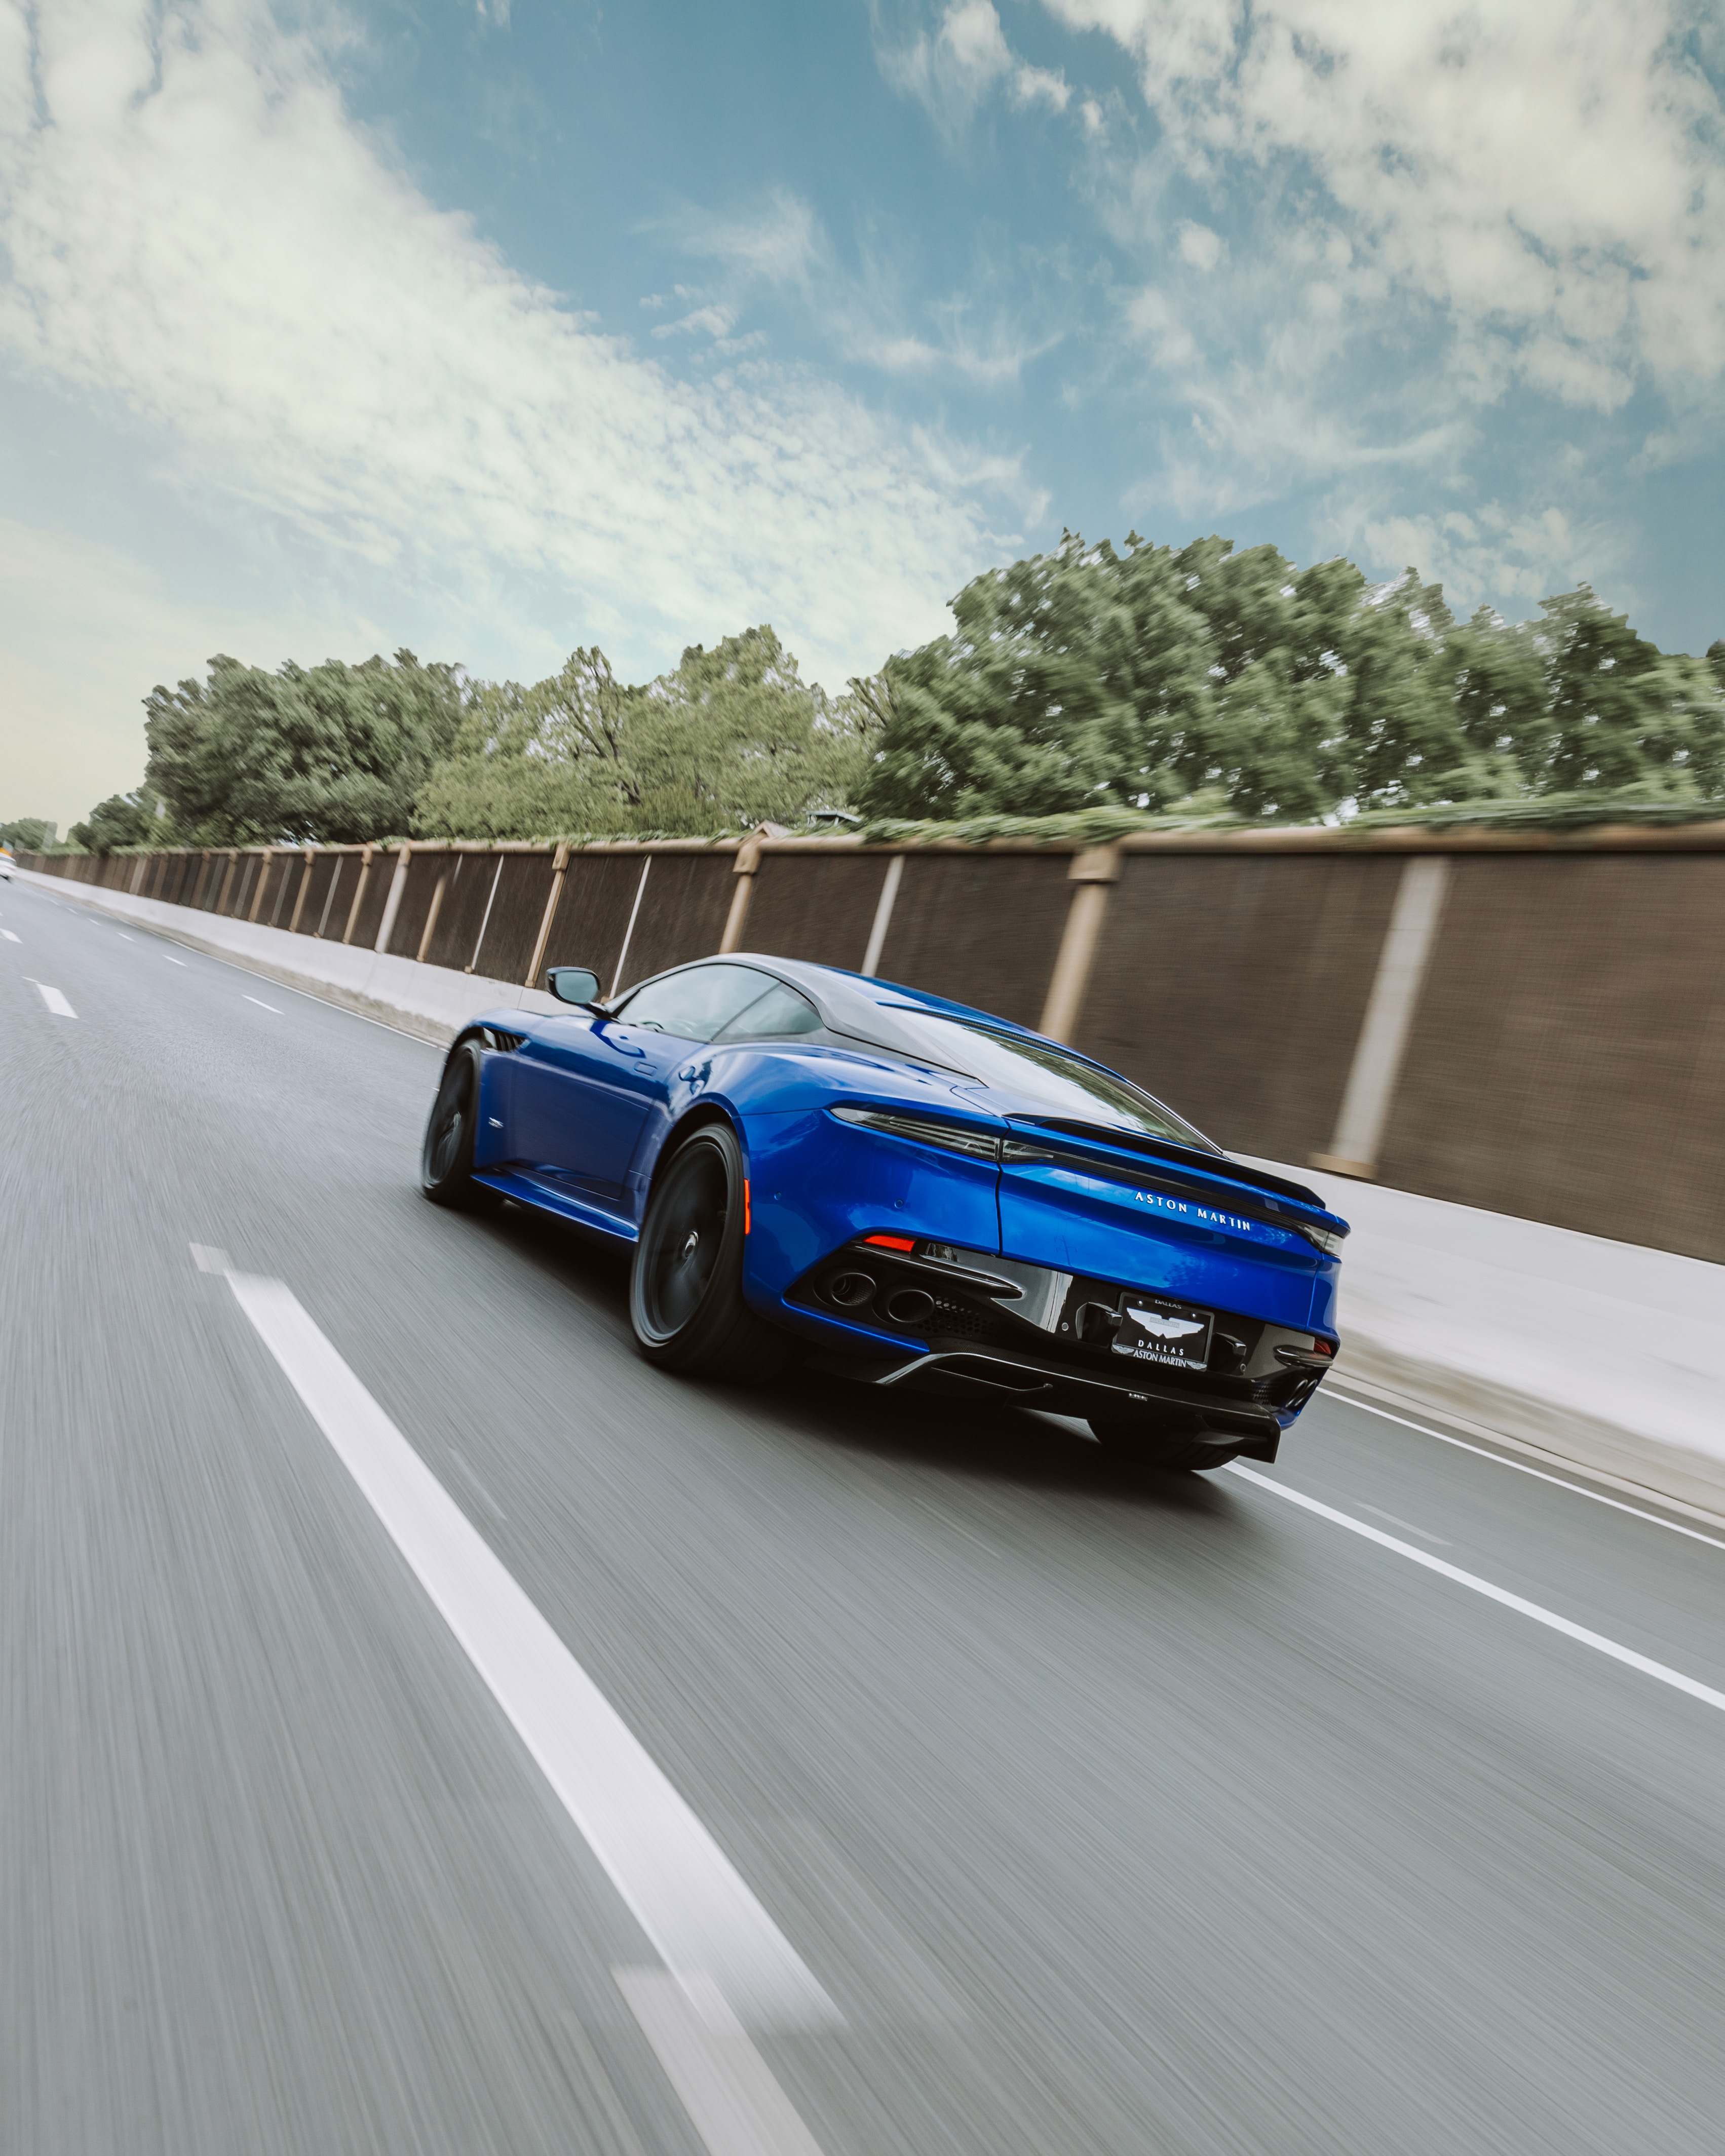 PC Wallpapers aston martin, sports, cars, blue, road, car, traffic, movement, speed